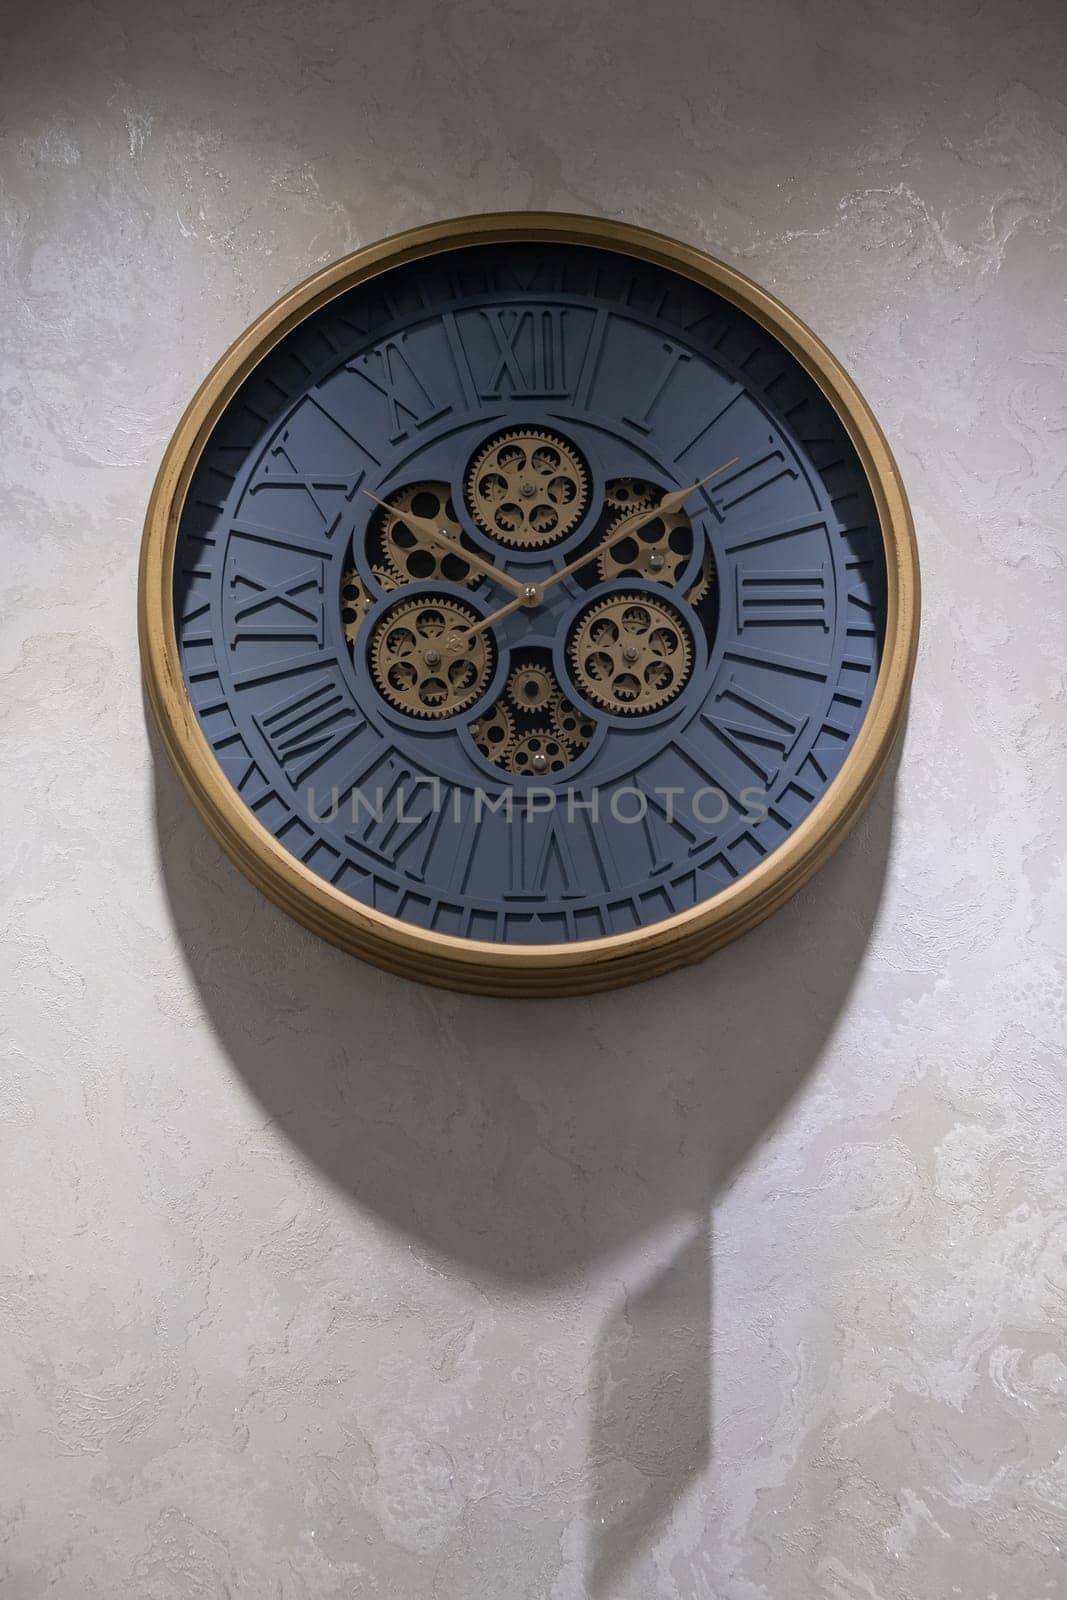 A round clock on the wall indicates the exact time. The decor in the room, copy space.